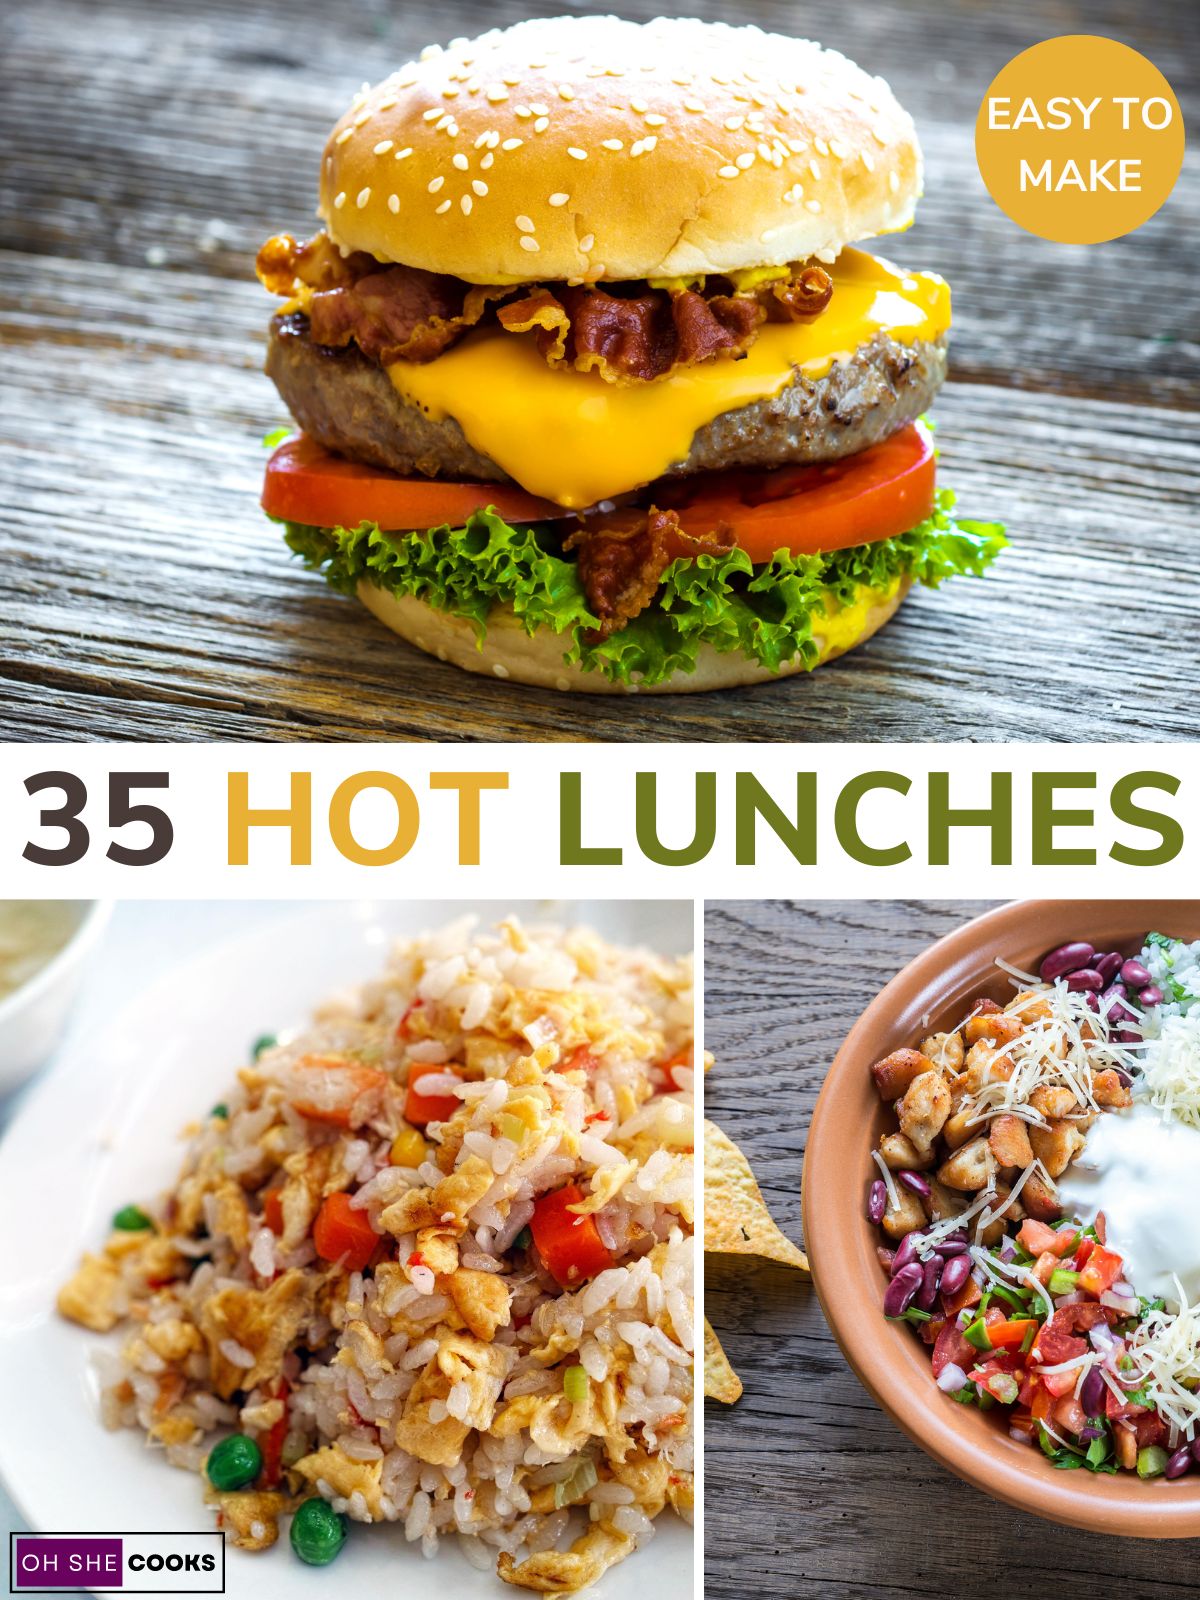 The 35 Best Hot Lunch Ideas - Oh She Cooks Recipes